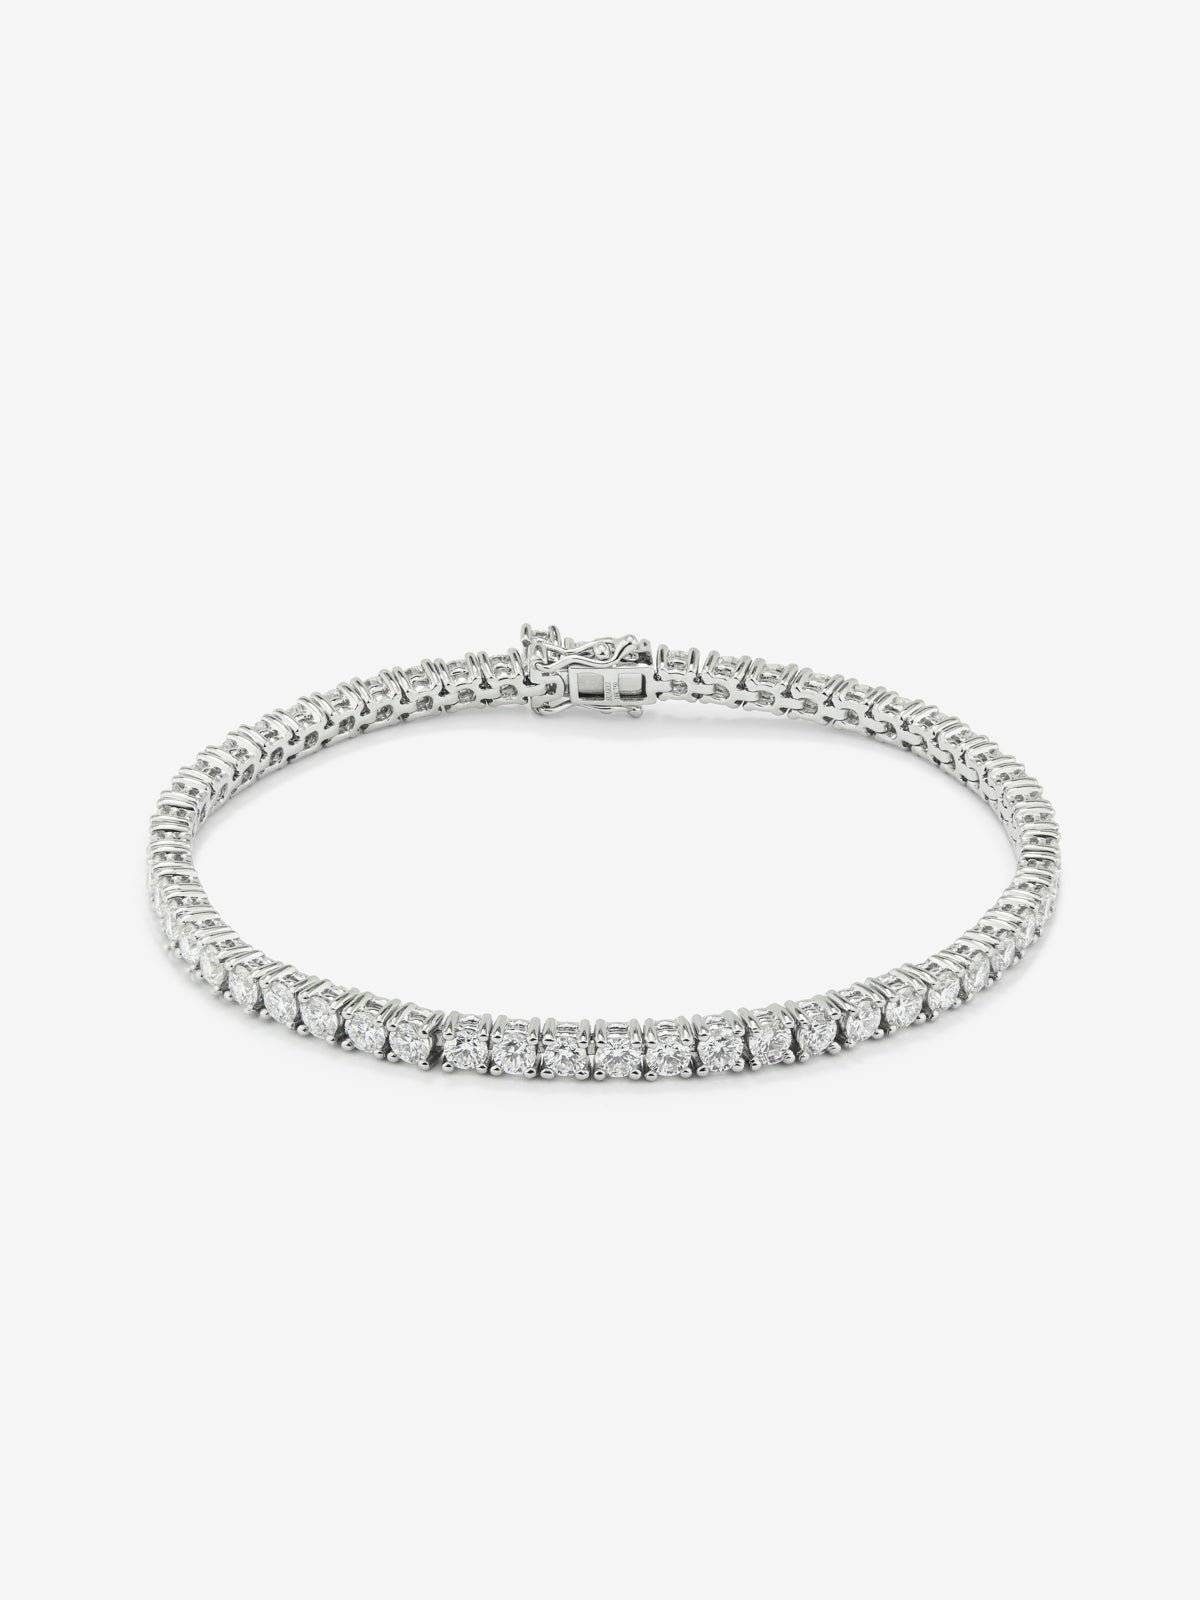 18K white gold rivière bracelet with 60 brilliant-cut diamonds with a total of 4.7 cts